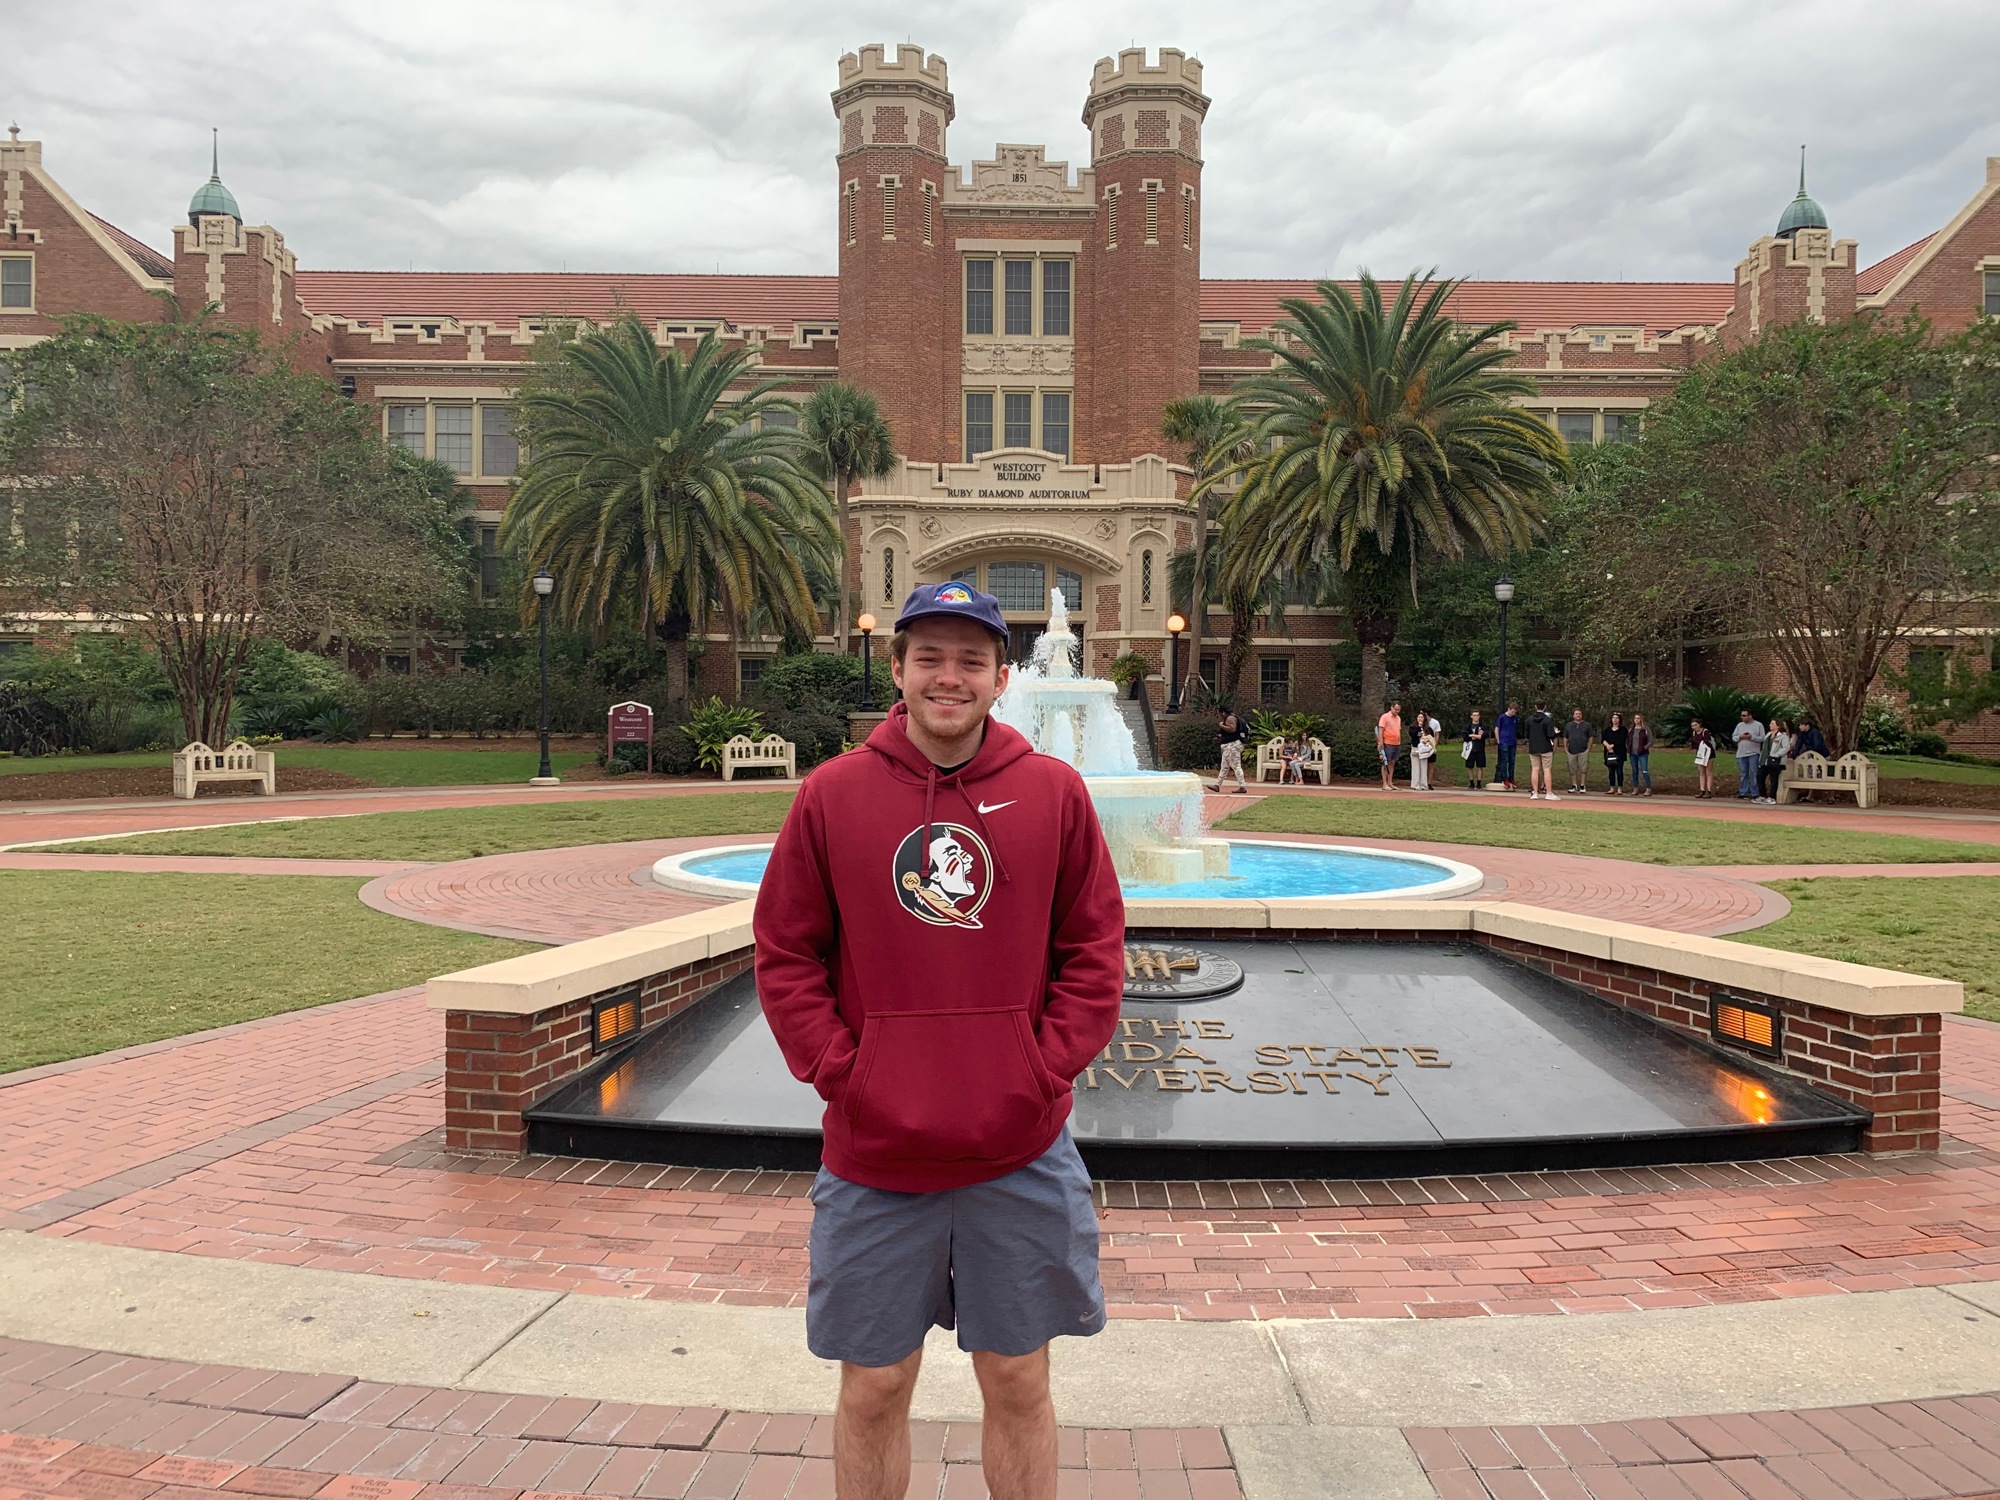 McNeill is a rising sophomore at Florida State University, where he studies marketing. (Courtesy)